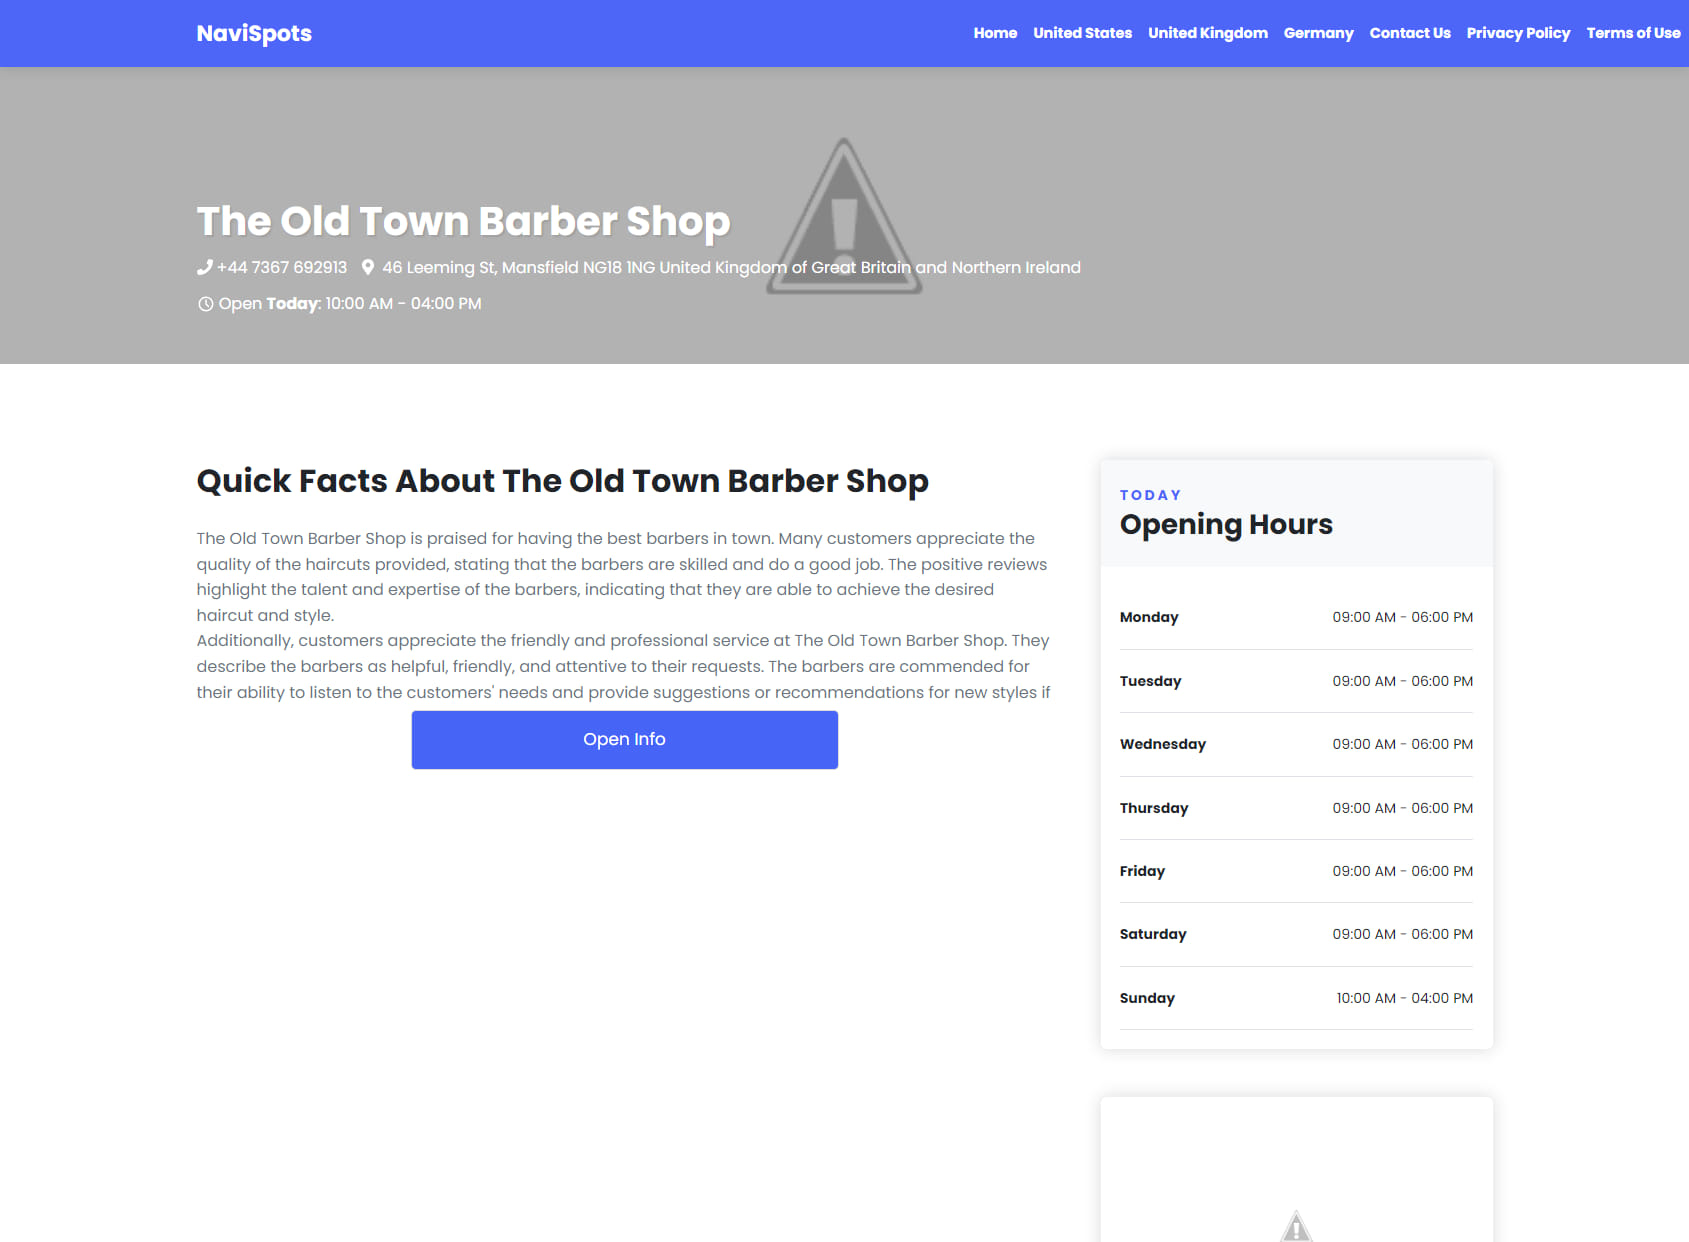 The Old Town Barber Shop